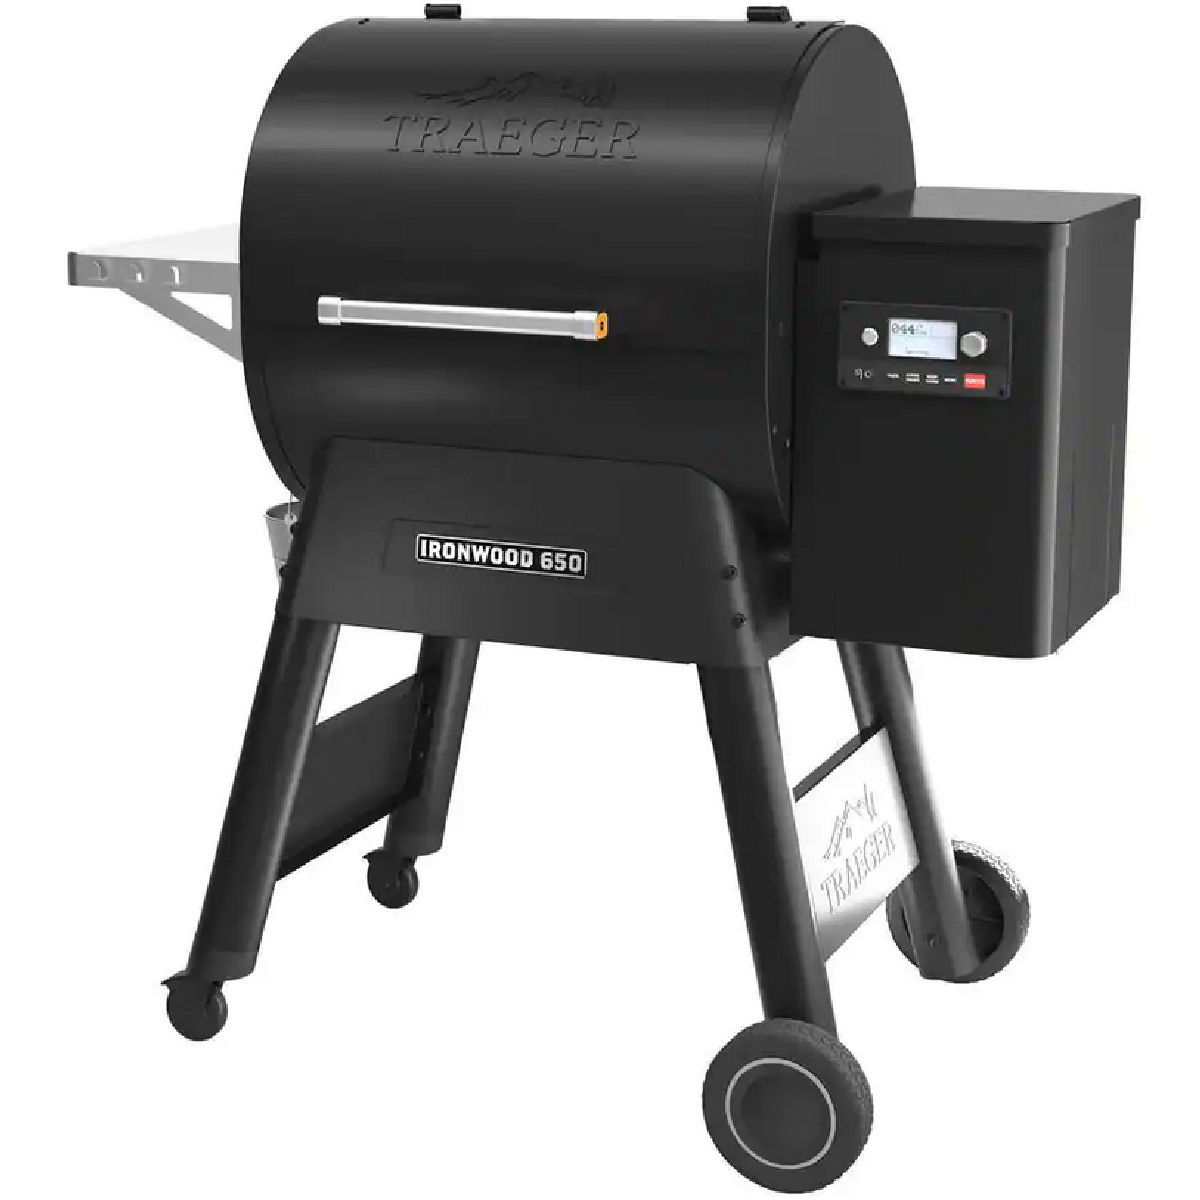 Traeger Ironwood 650 Wifi Pellet Grill and Smoker